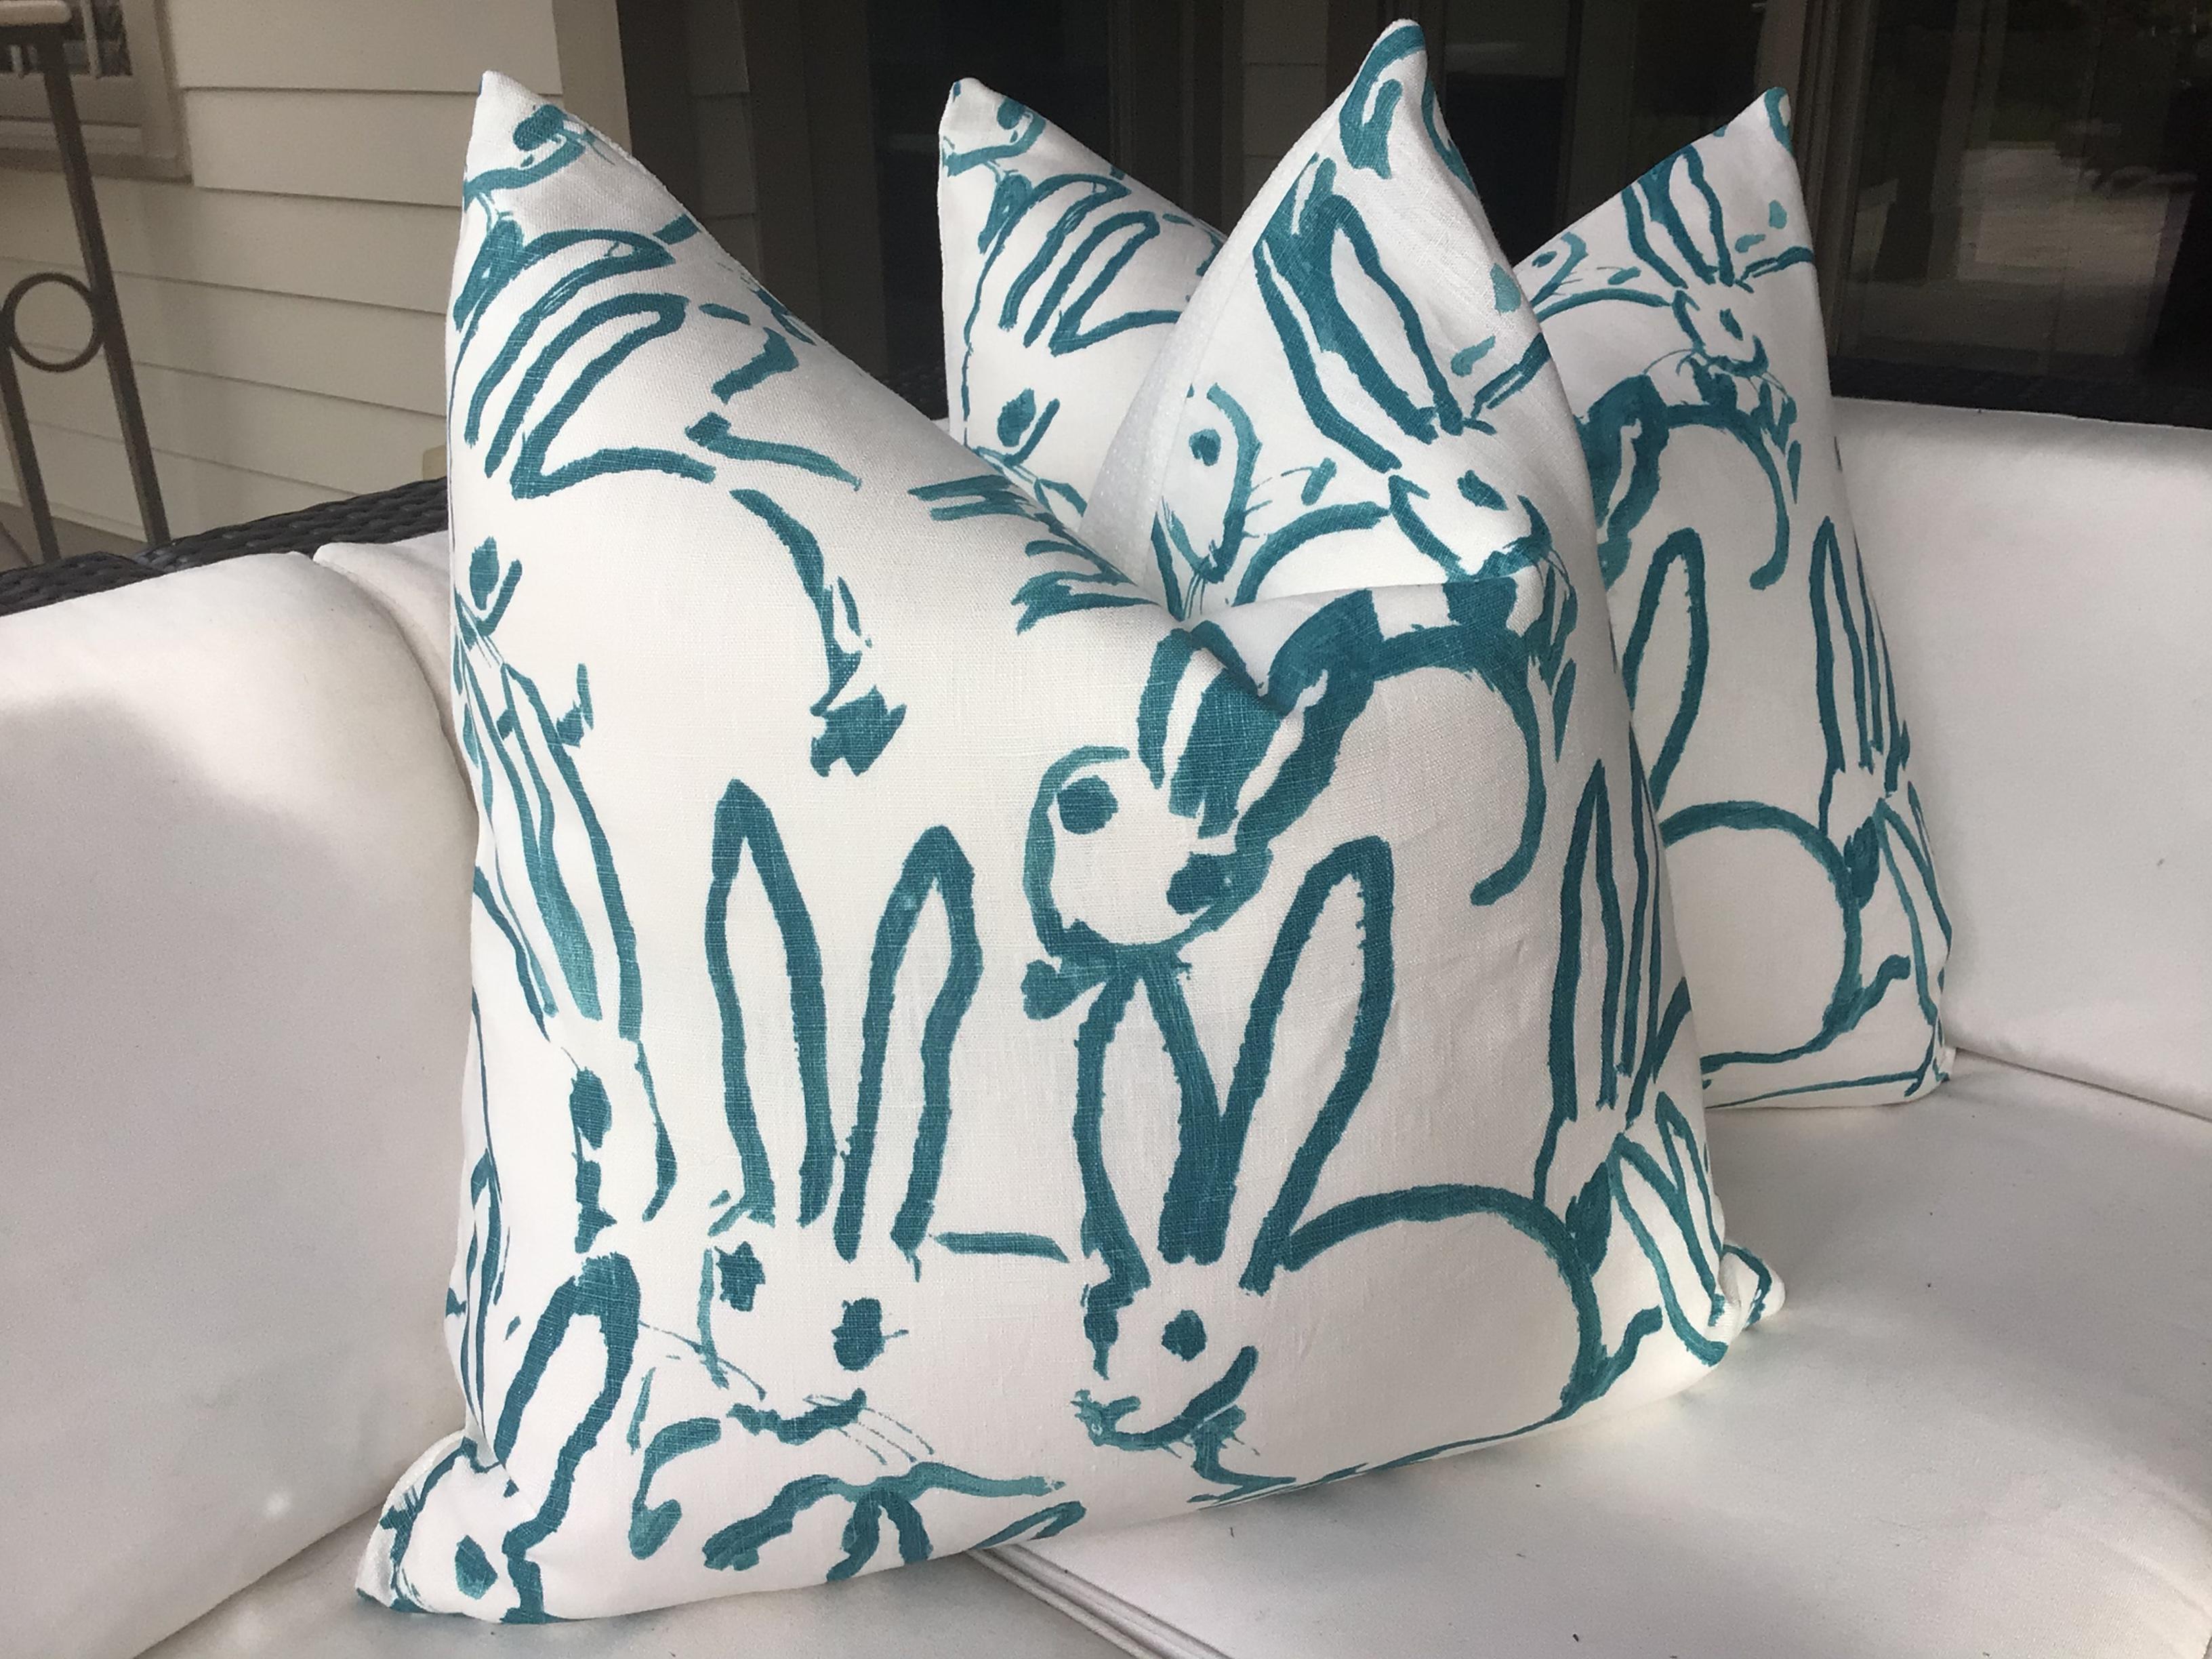 Contemporary Hunt Slonen “Bunny Hutch” in Aqua 22” Down Filled Pillows - a Pair For Sale